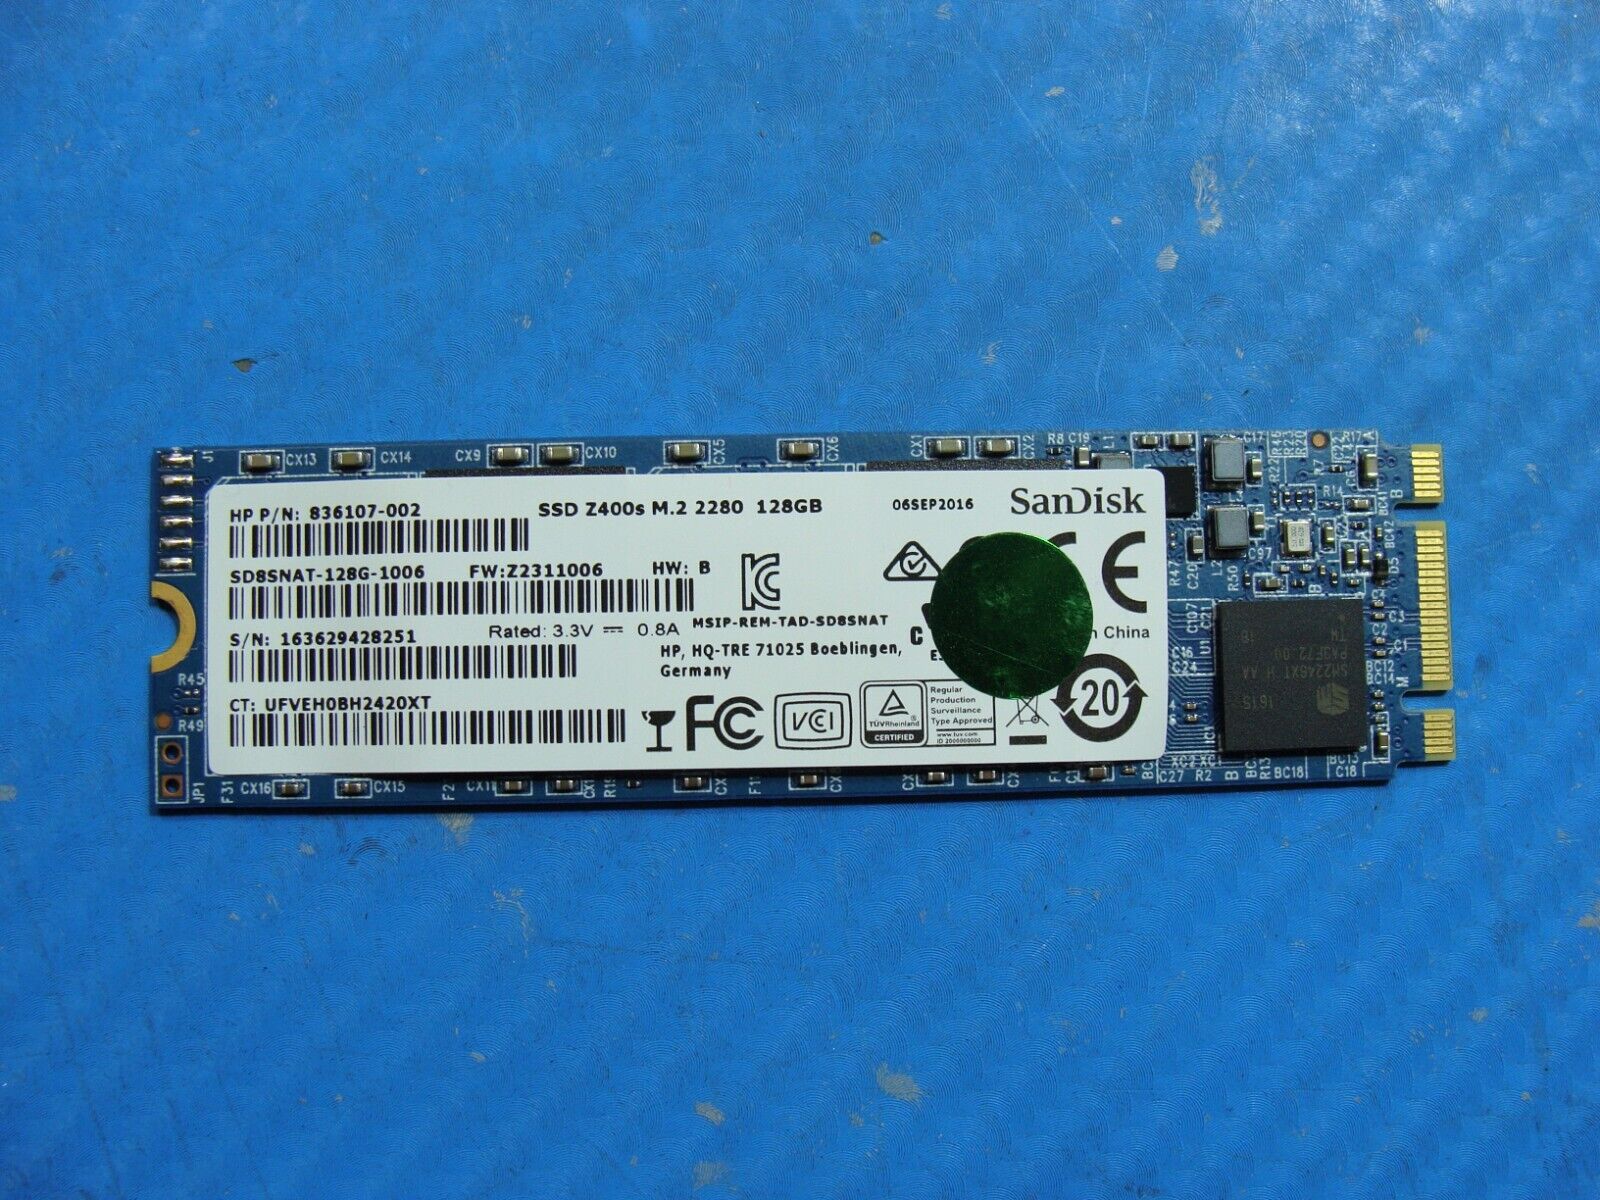 HP 15t-bc000 SanDisk 128GB SATA M.2 SSD Solid State Drive SD8SNAT-128G-1006